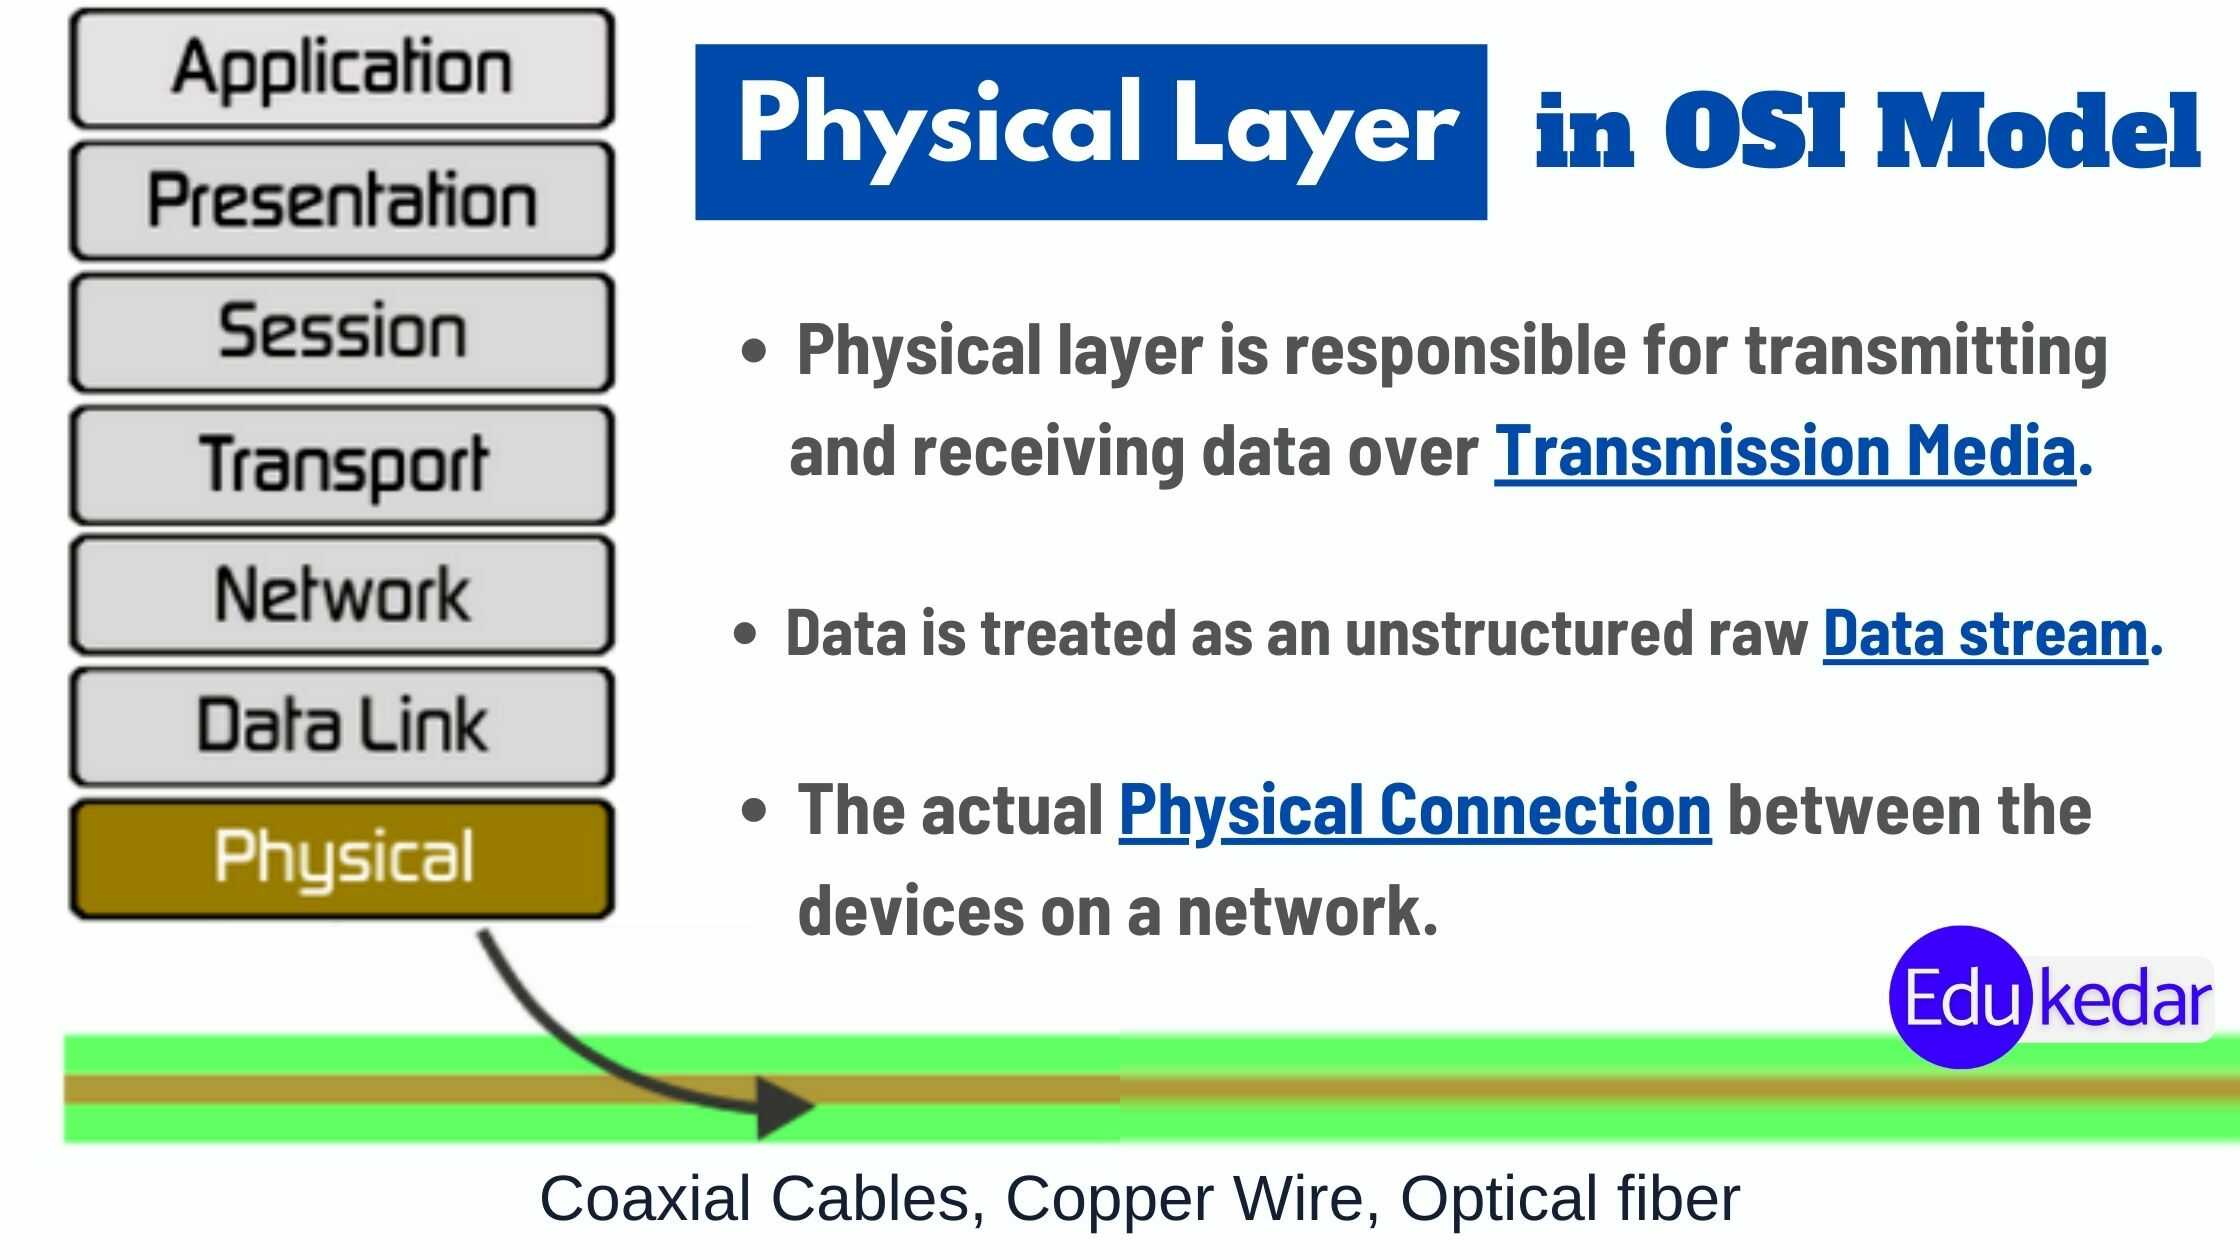 Physical layer